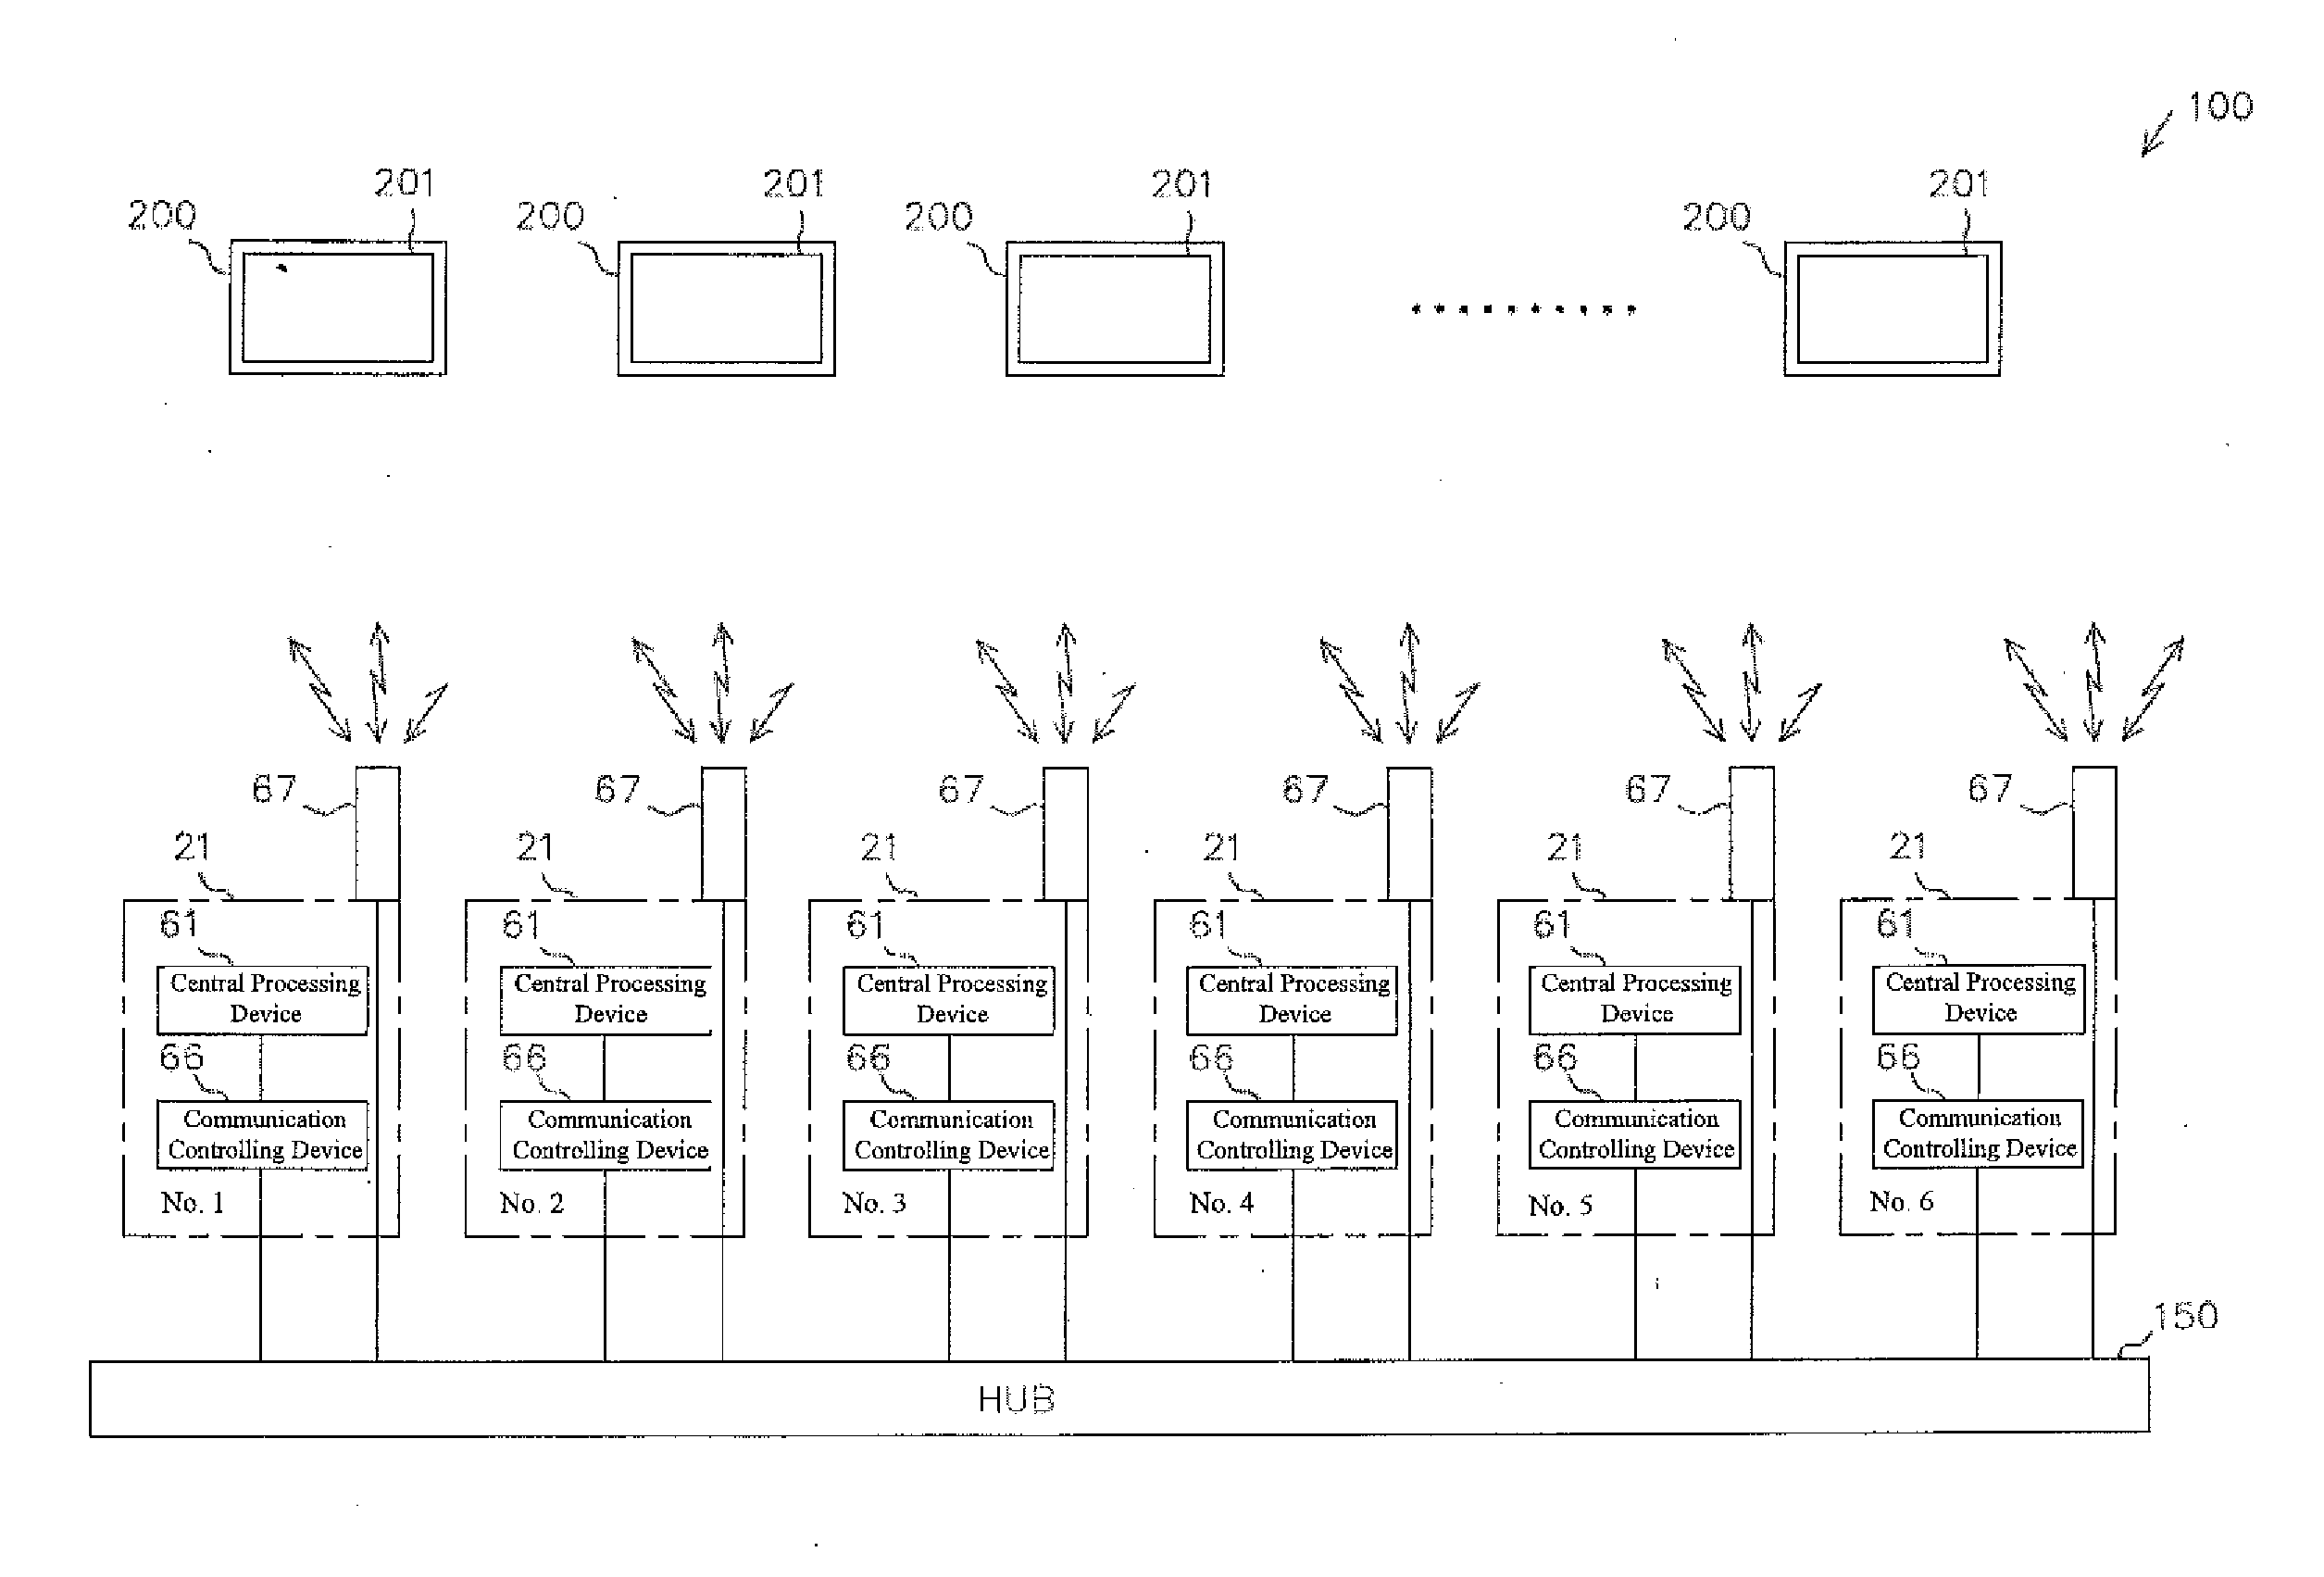 Inspecting device monitoring system